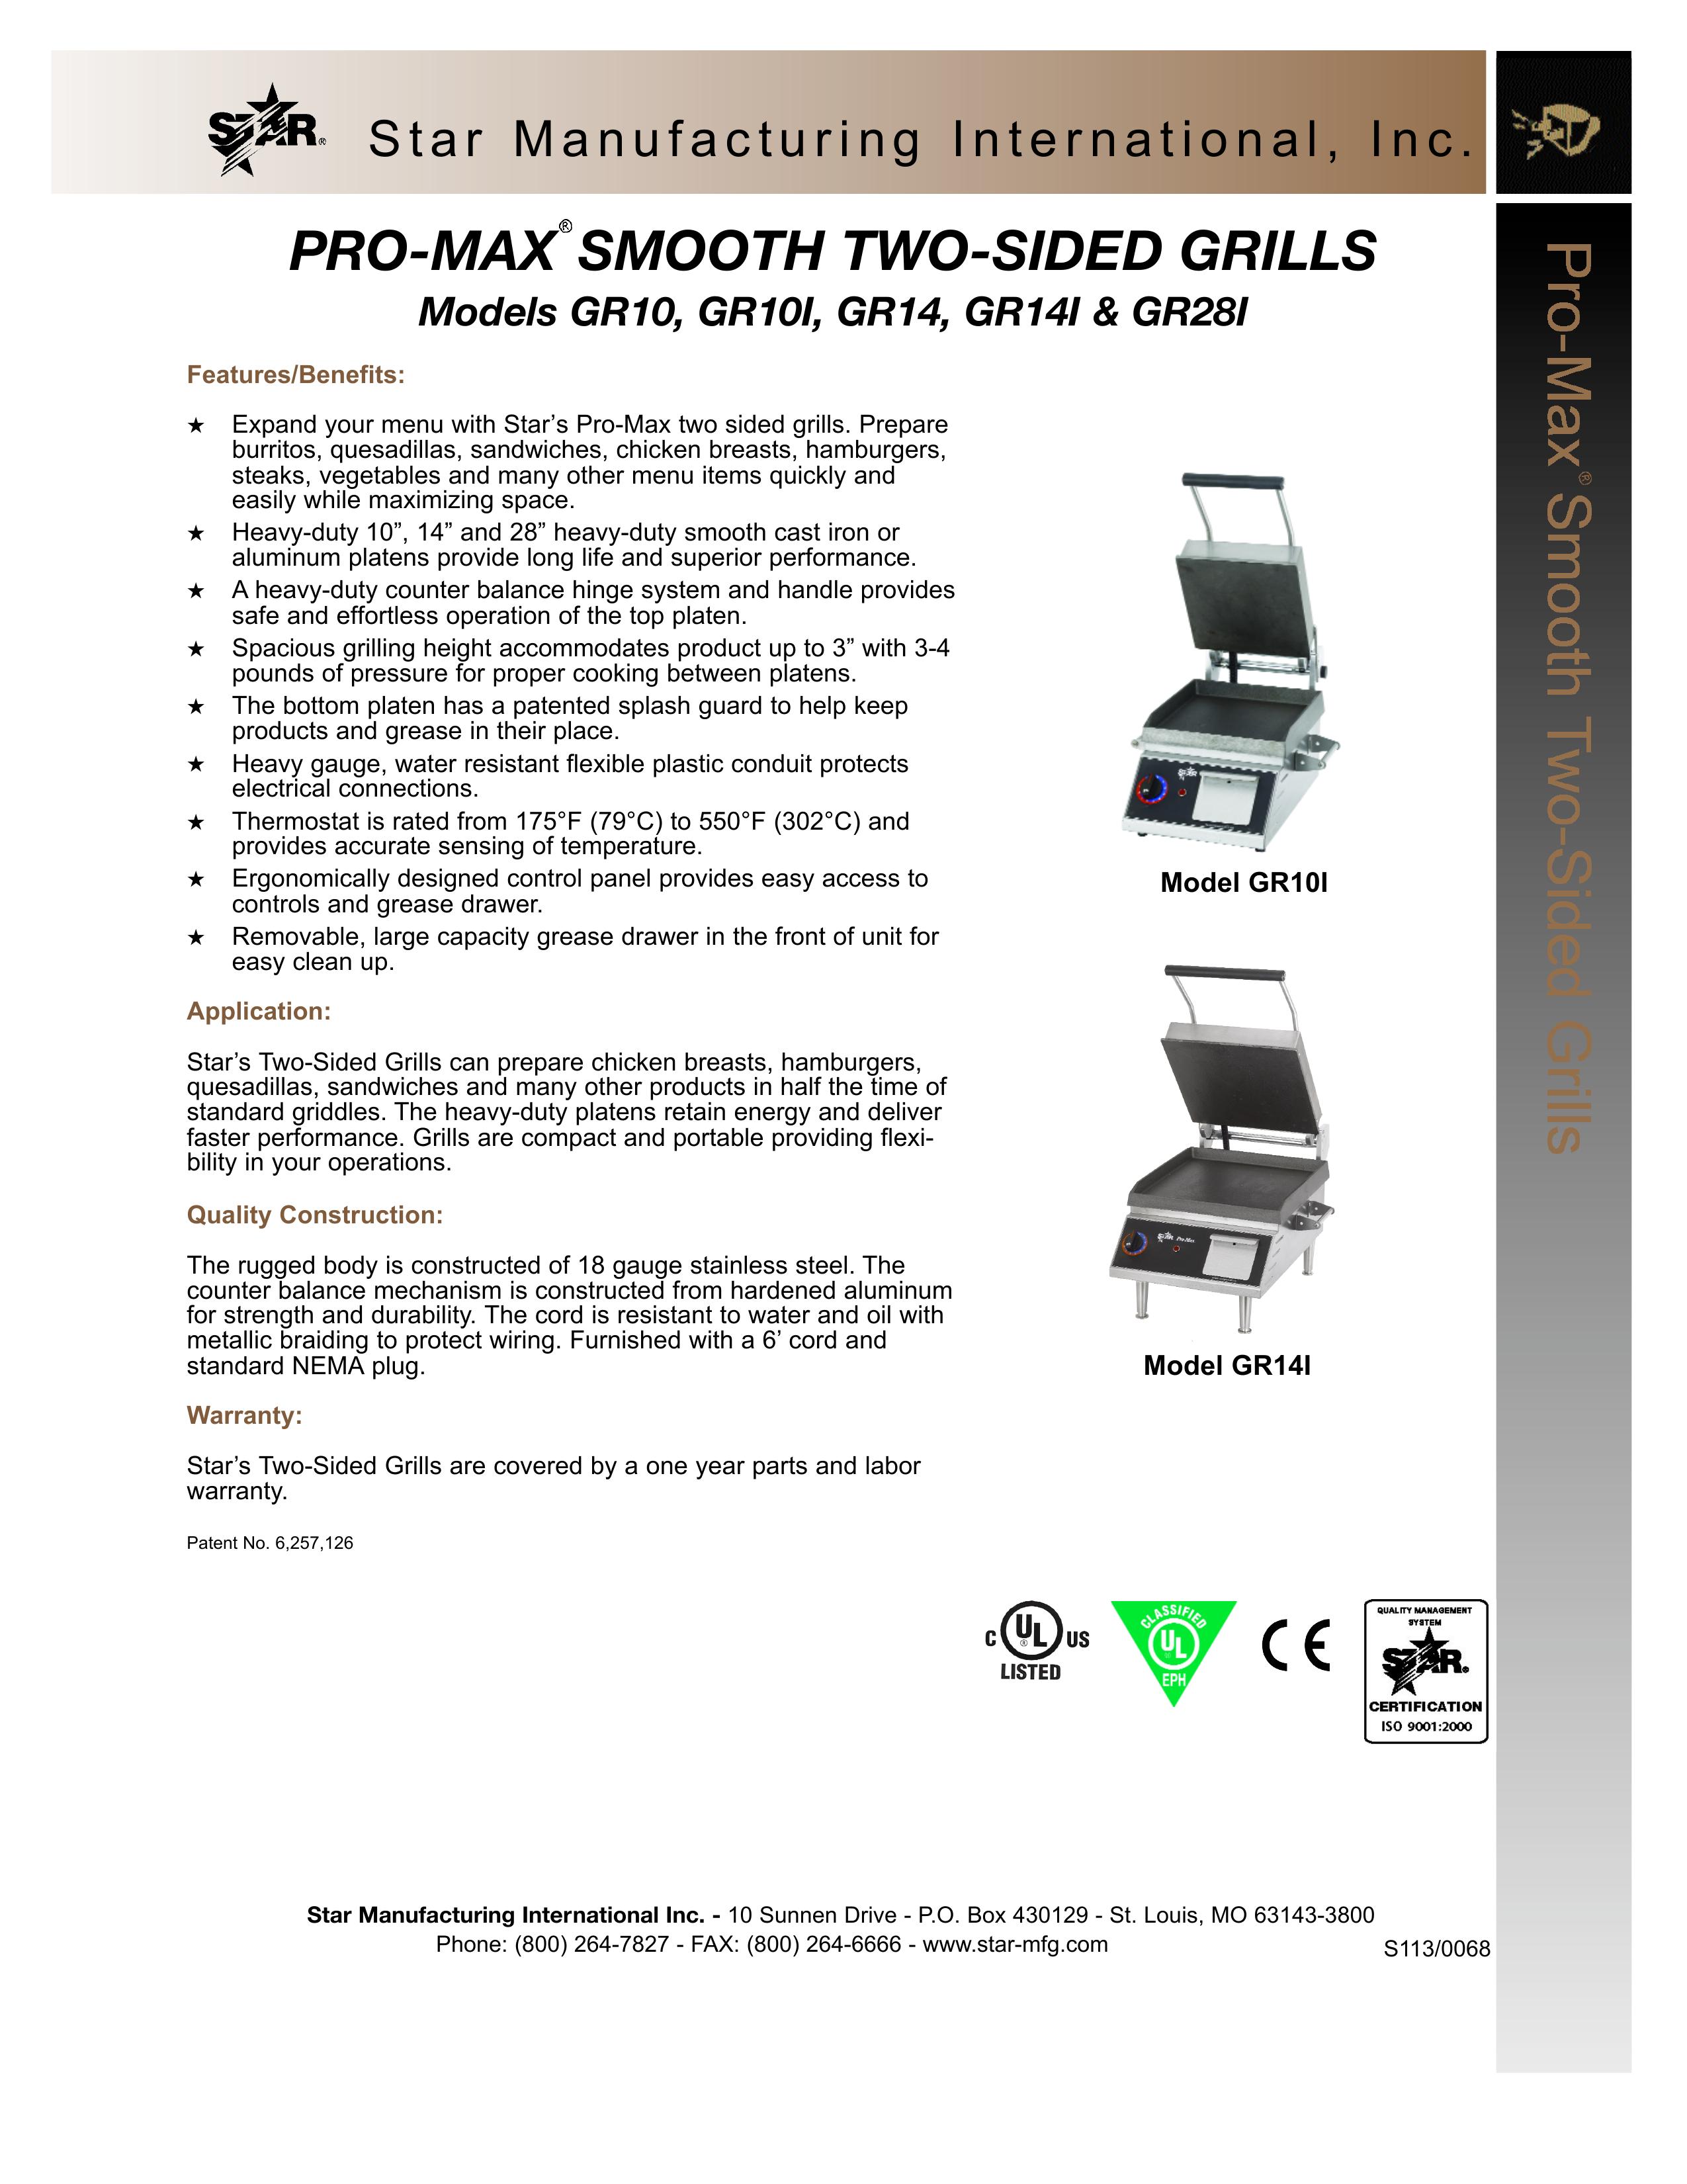 Star Manufacturing GR28I Gas Grill User Manual